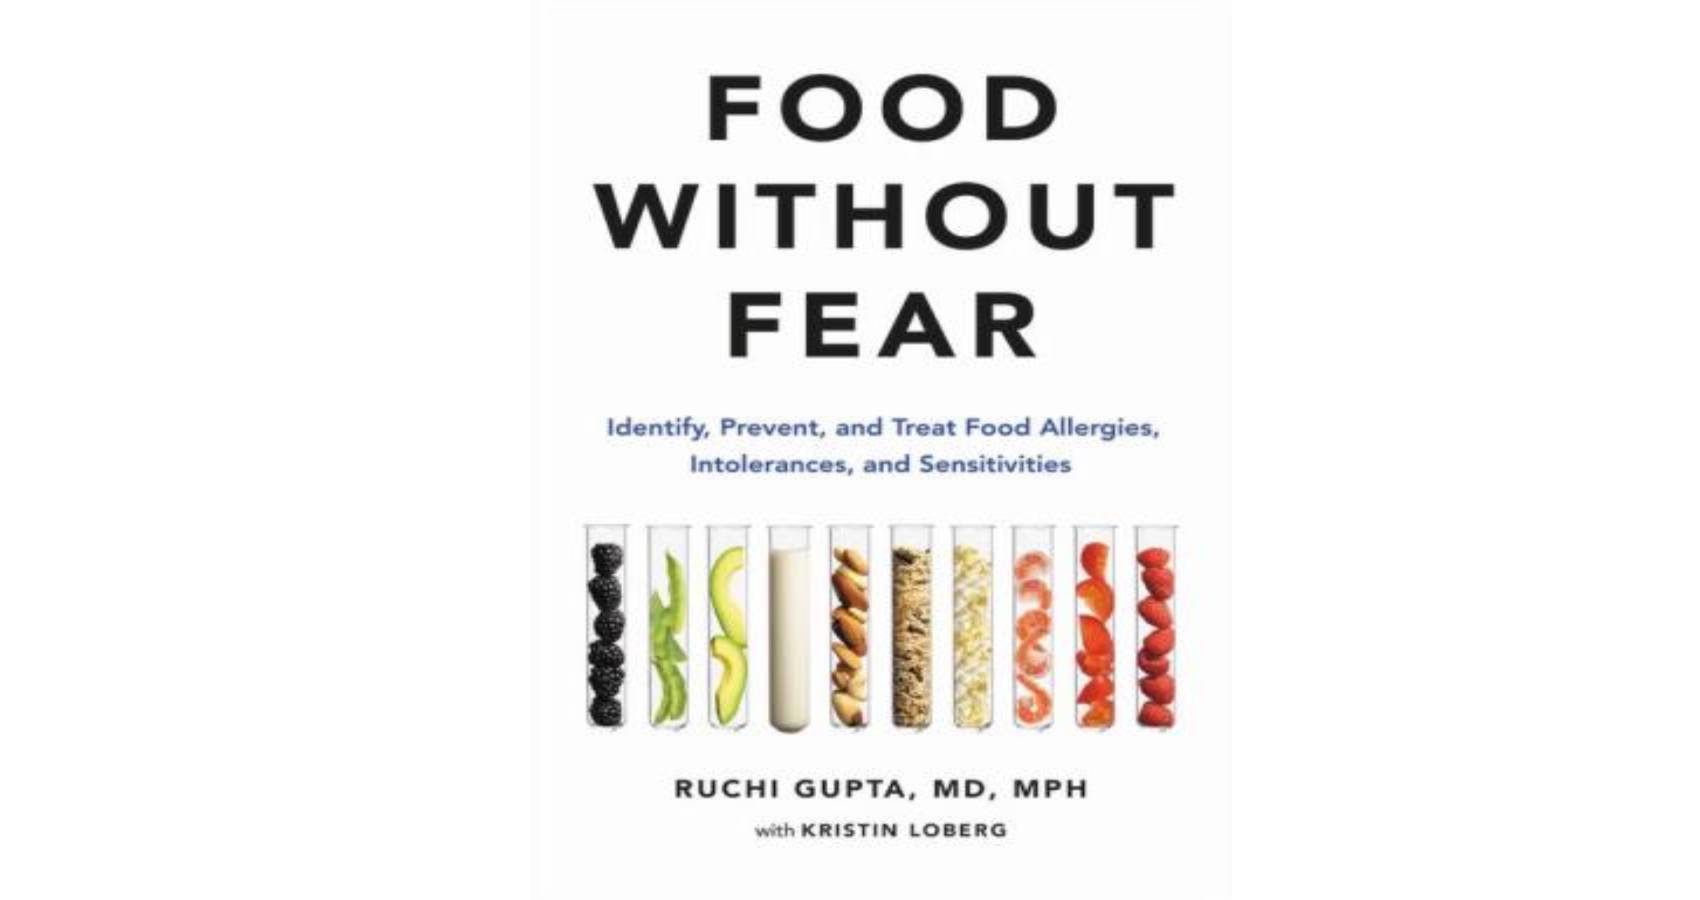 “Food Without Fear,” A Book By Dr. Ruchi Gupta Presents A Groundbreaking Approach To Food Allergies And Sensitivities